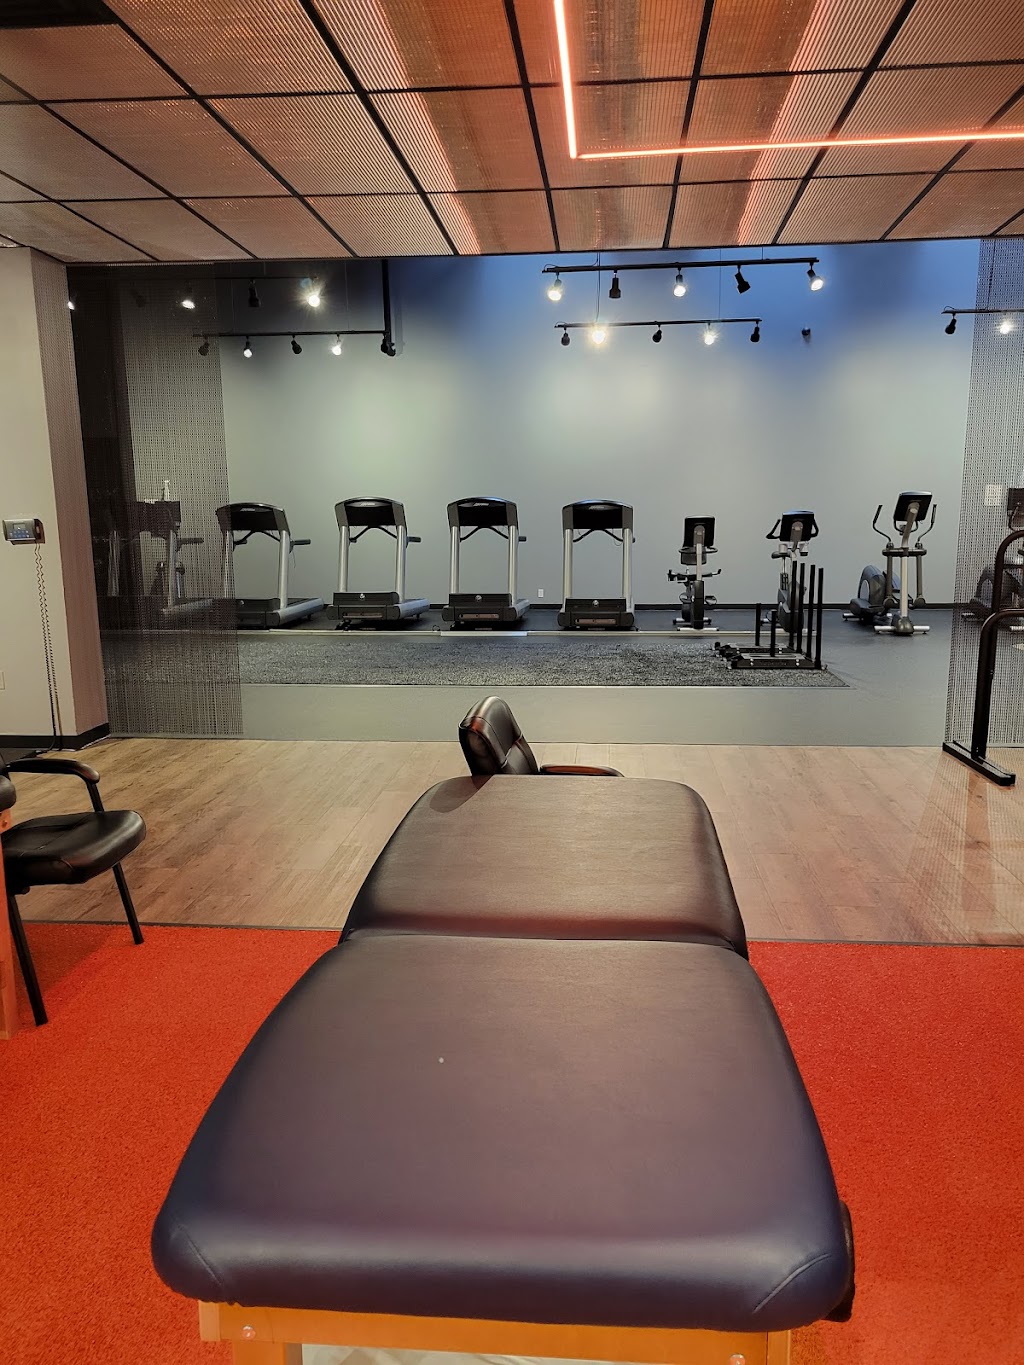 Connect Physical Therapy LLC | 100 Main St N, Southbury, CT 06488 | Phone: (959) 209-4318